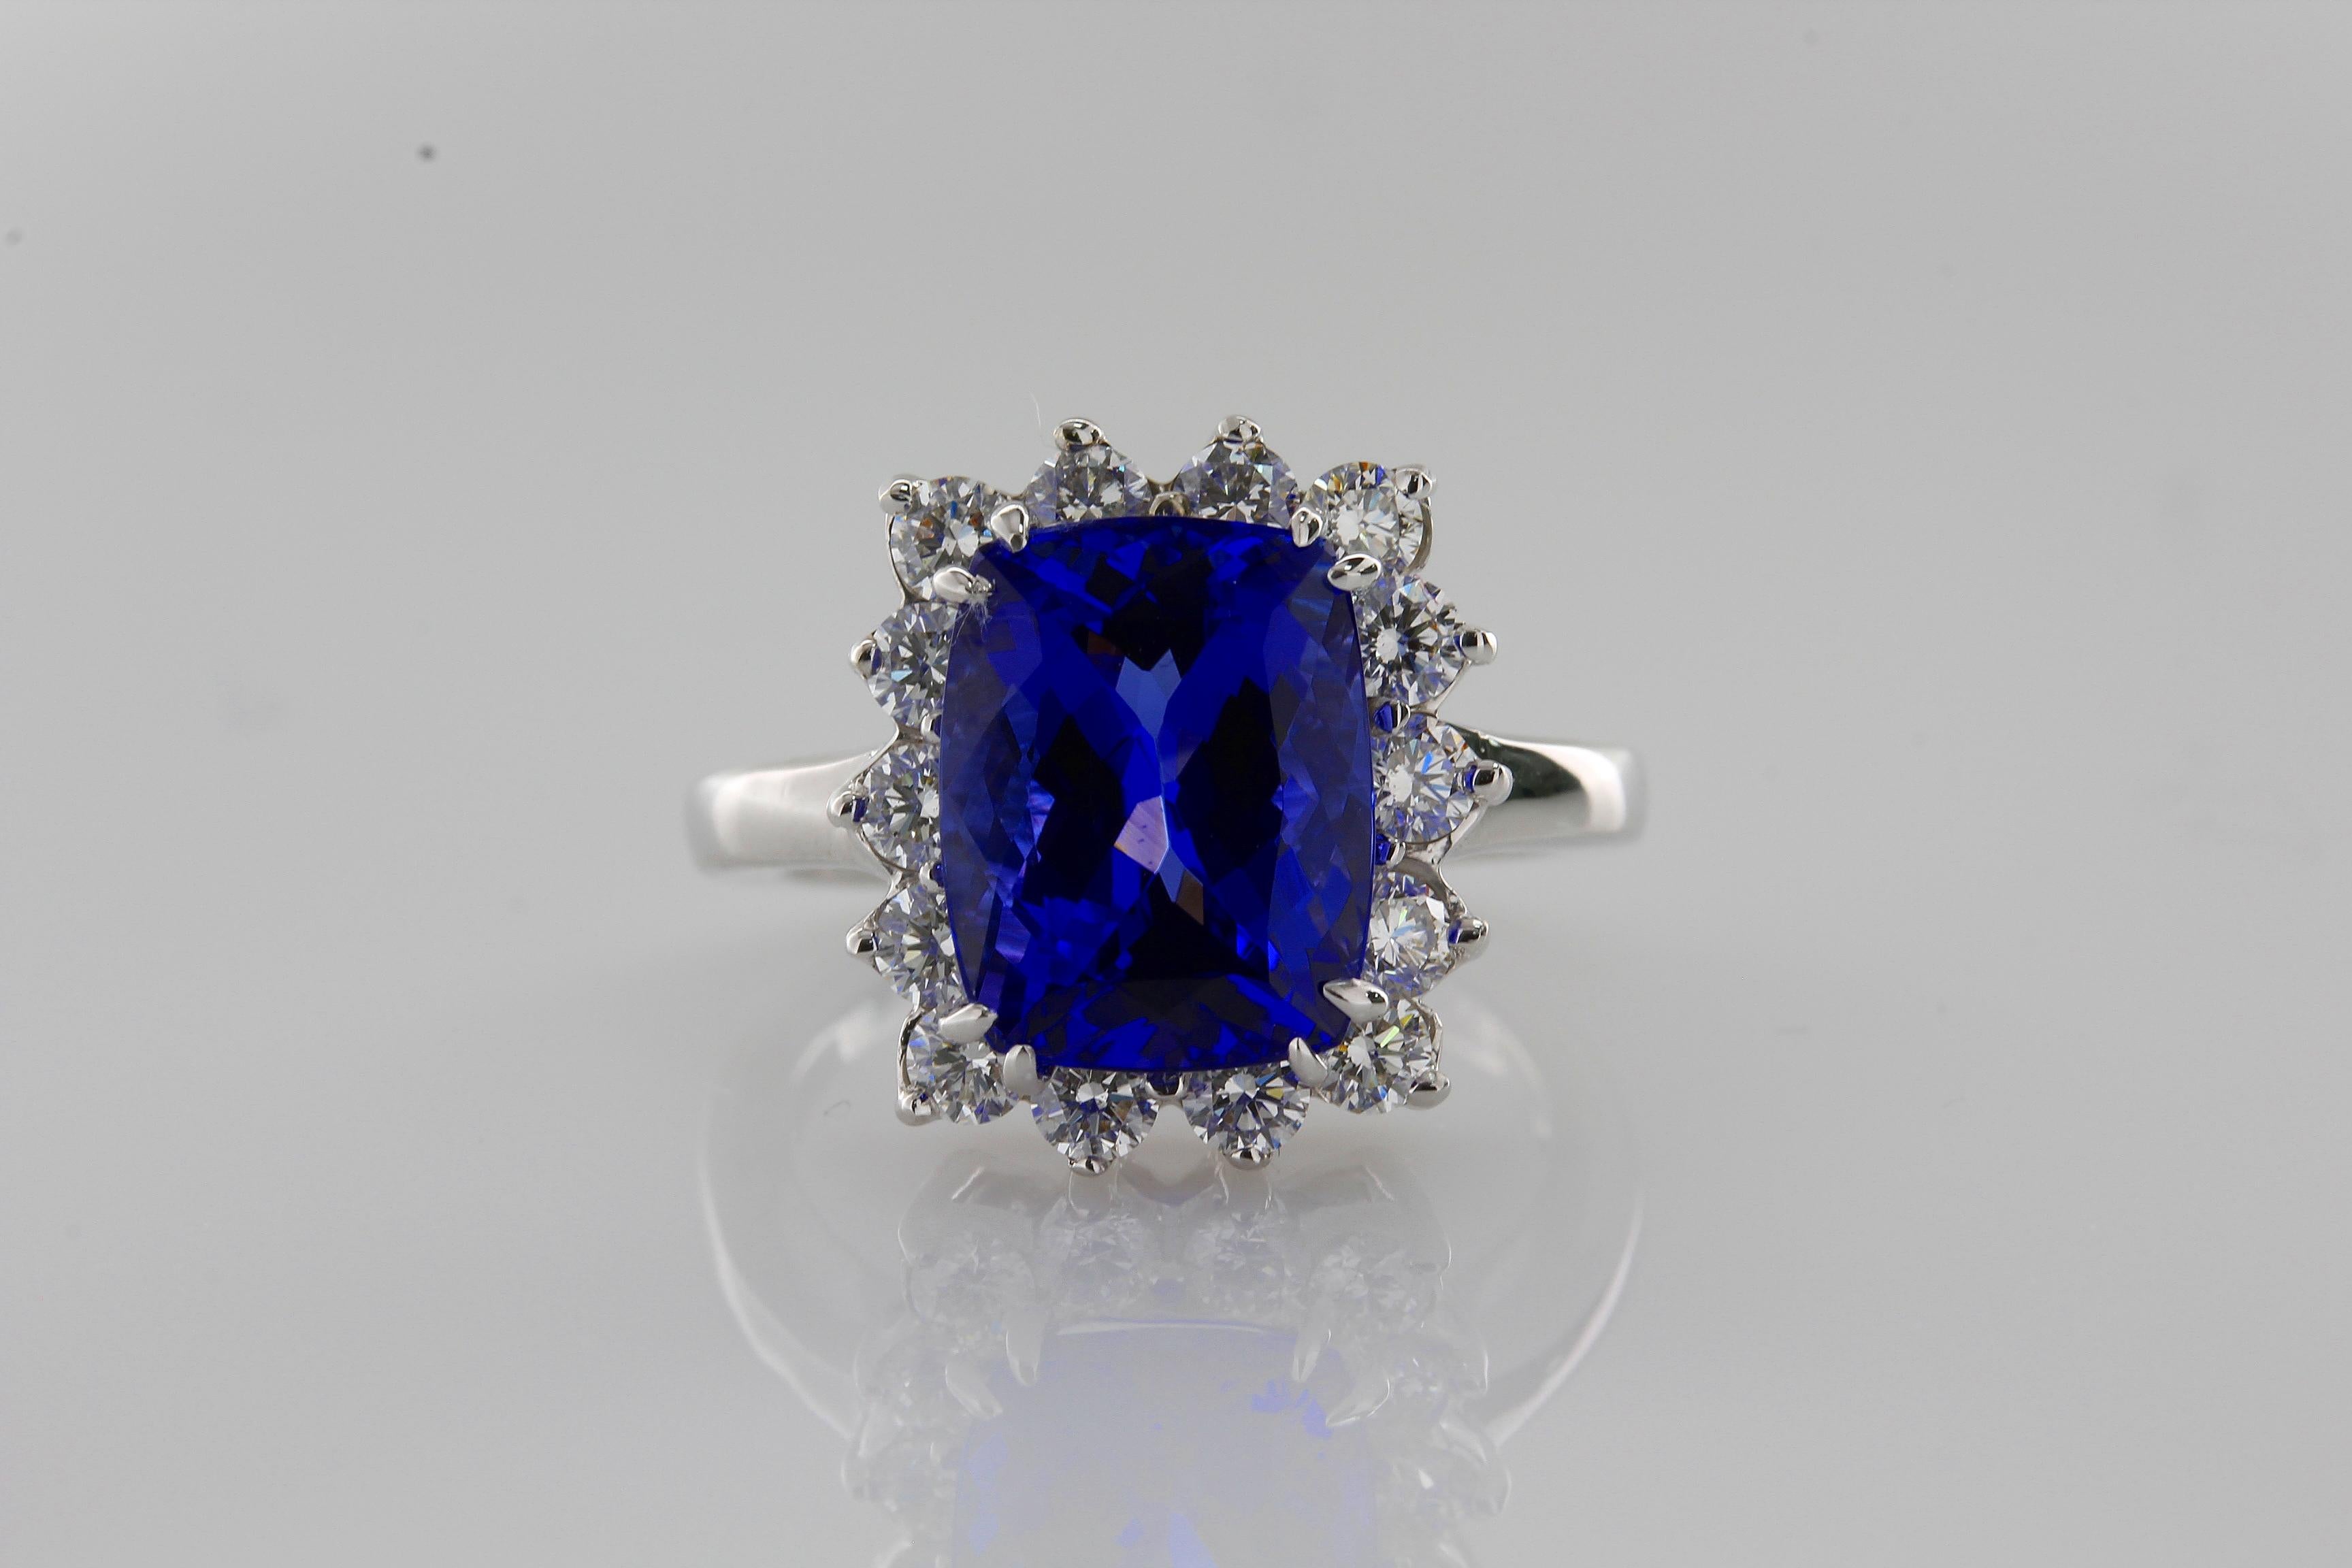 Incredible Deal on 4.52 Carat Cushion Cut Violet Blue Natural Tanzanite Gemstone mounted in a 14 Karat White Gold Ring.
Total Carat Weight on the ring is 5.49
The beautiful, classic and simple design on this ring makes this large Cushion Blue